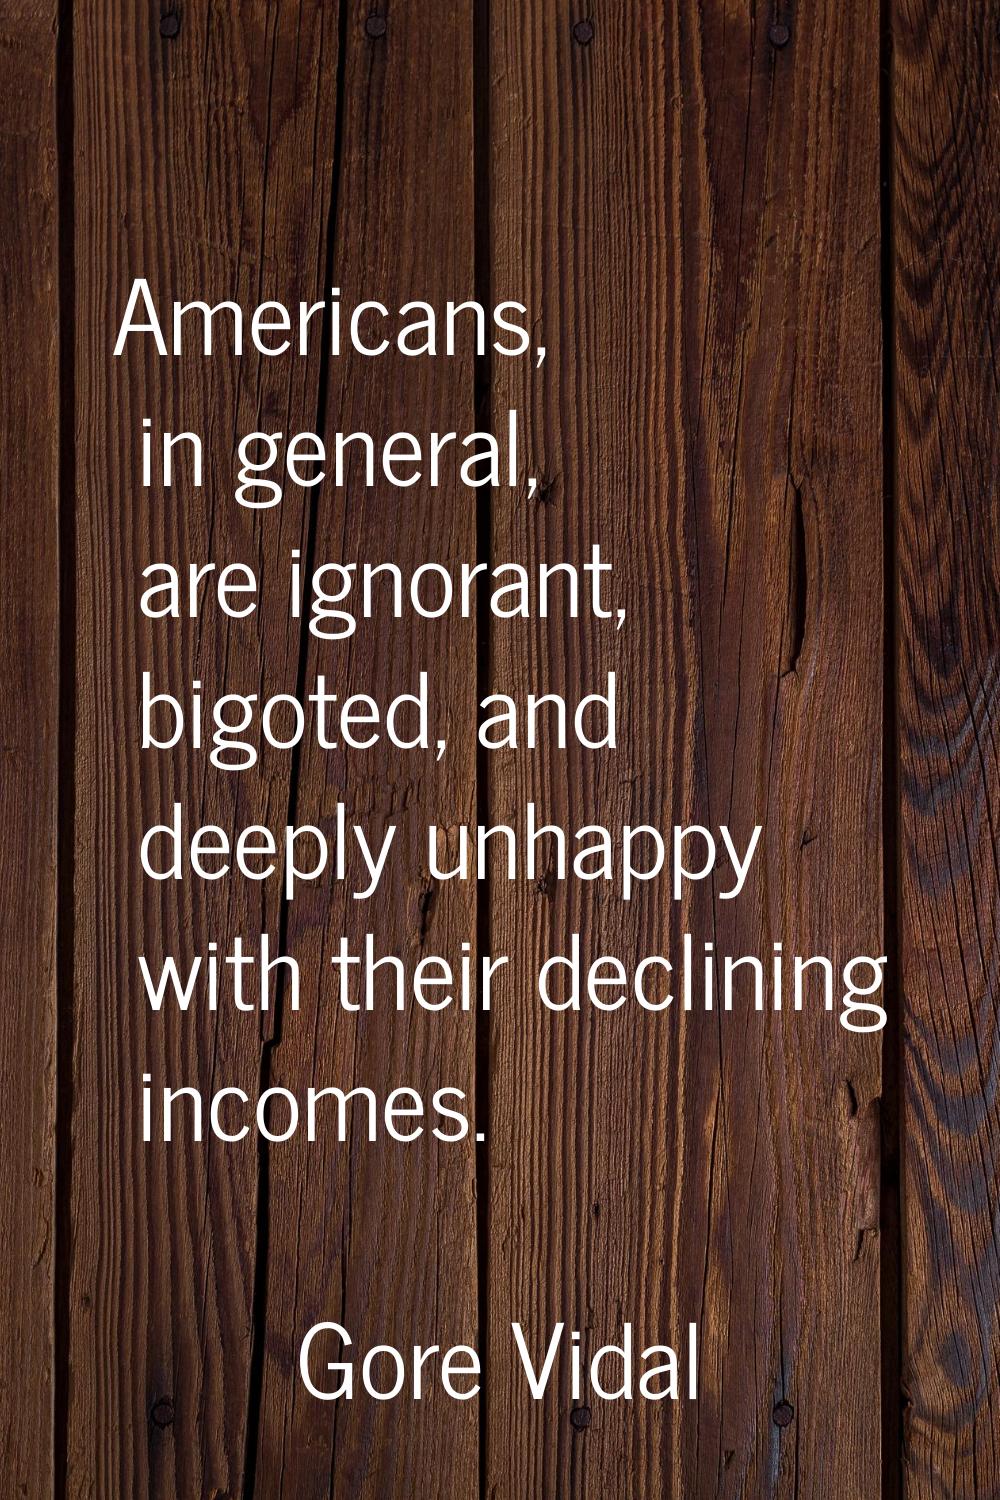 Americans, in general, are ignorant, bigoted, and deeply unhappy with their declining incomes.